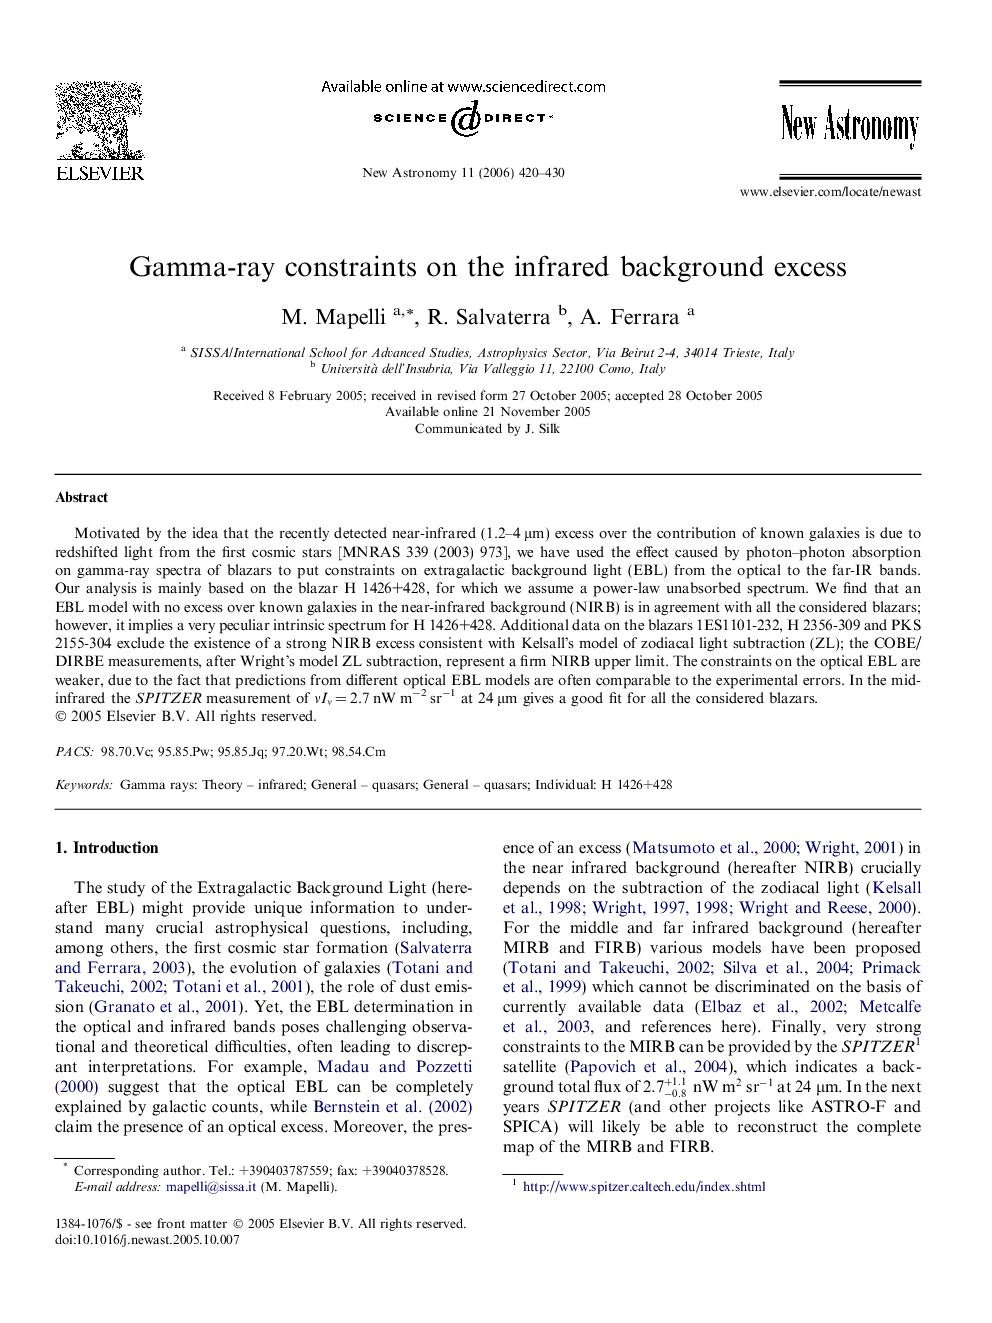 Gamma-ray constraints on the infrared background excess